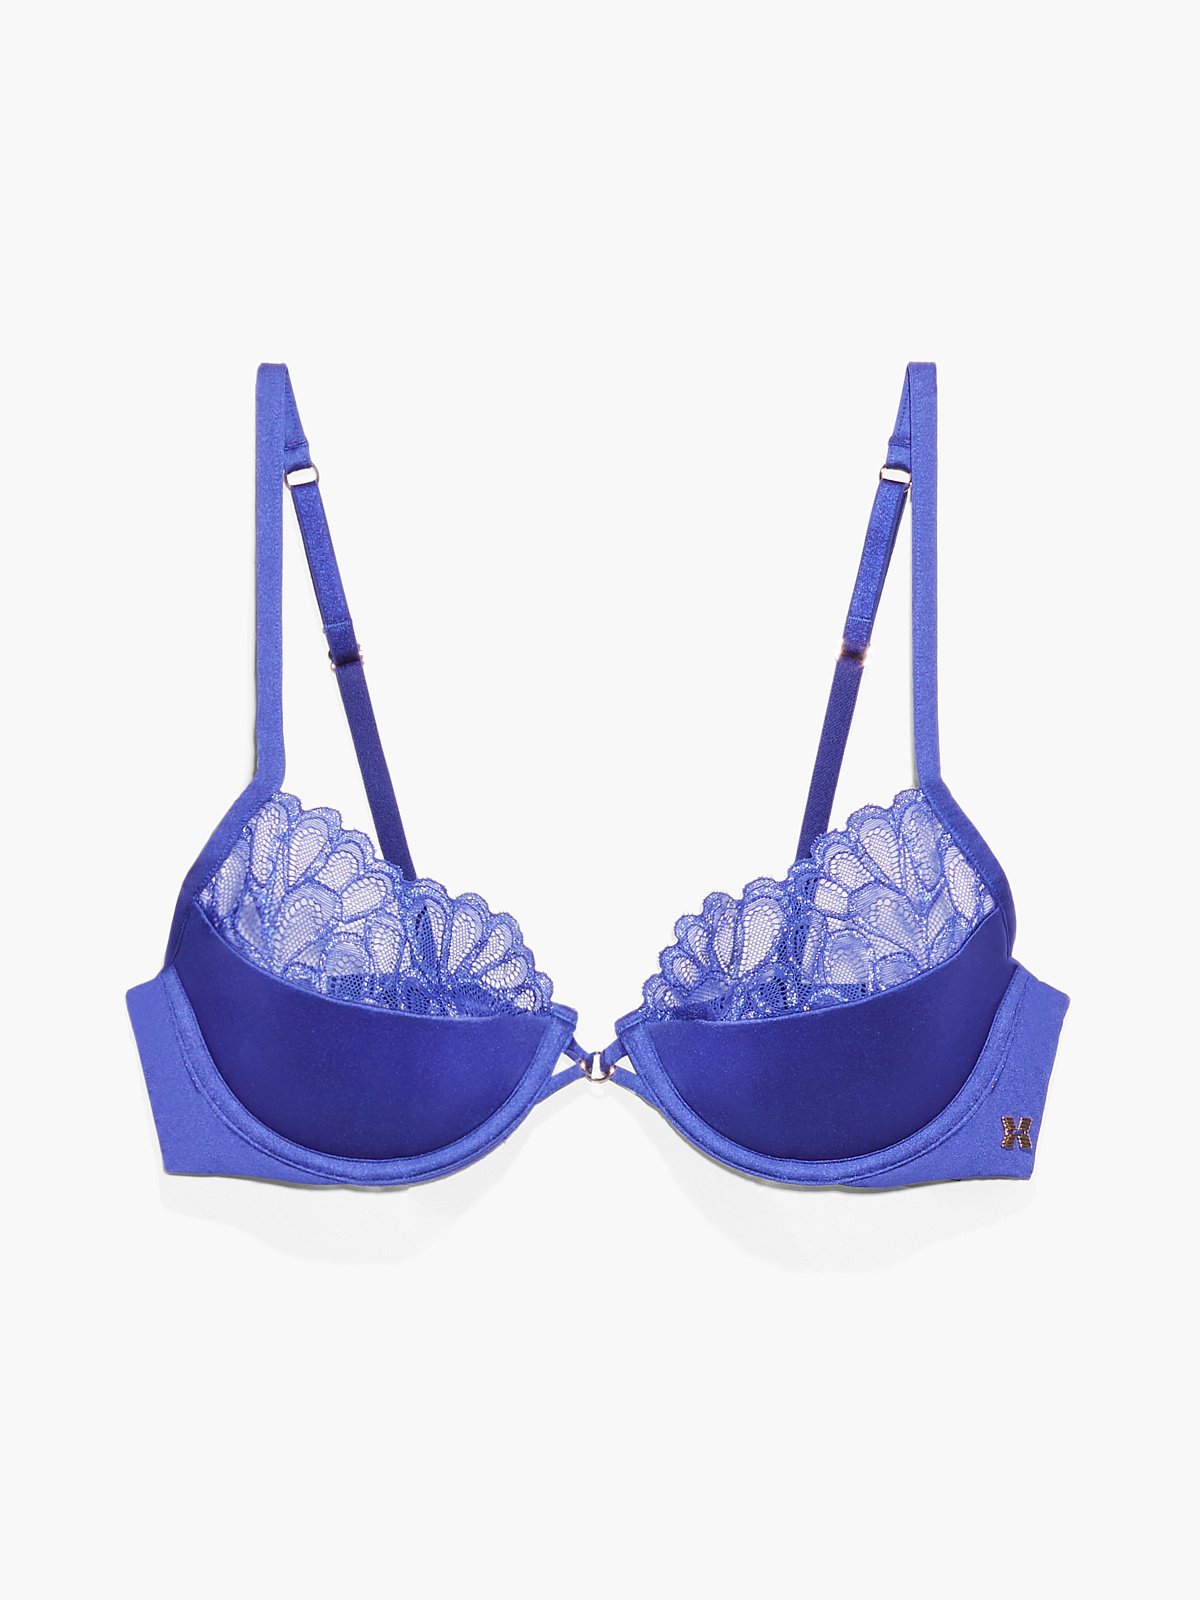 https://cdn.savagex.com/media/images/products/BA2042966-3821/SAVAGE-NOT-SORRY-HALF-CUP-BRA-WITH-LACE-BA2042966-3821-LAYDOWN-1200x1600.jpg